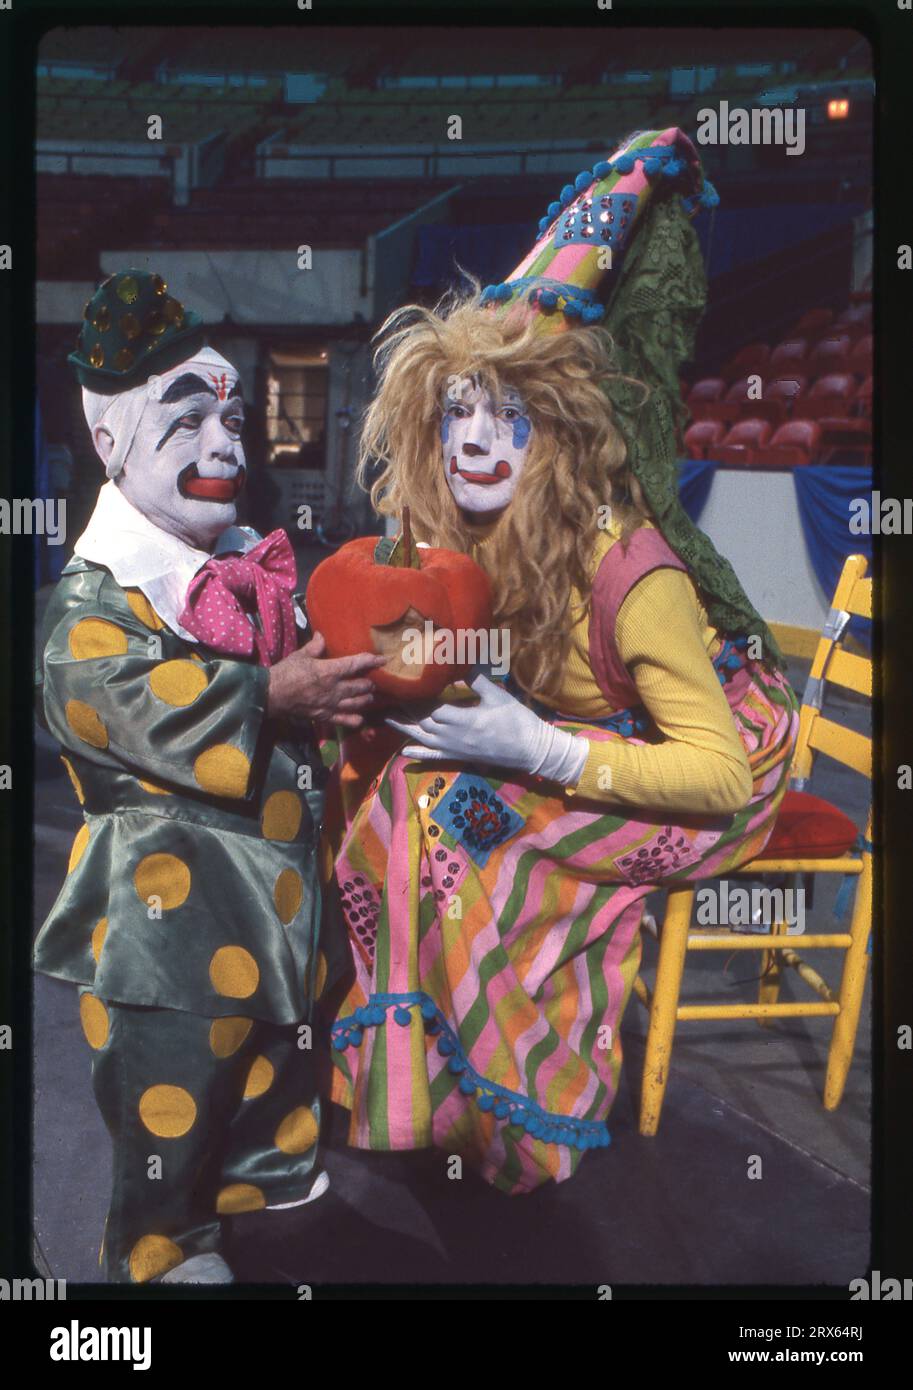 Photo of 2 Ringling Brothers clowns in full makeup holding a pumpkin that seems to have been bitten. At Clown College auditions in 1979. The clown to the left is Prince Paul. Stock Photo